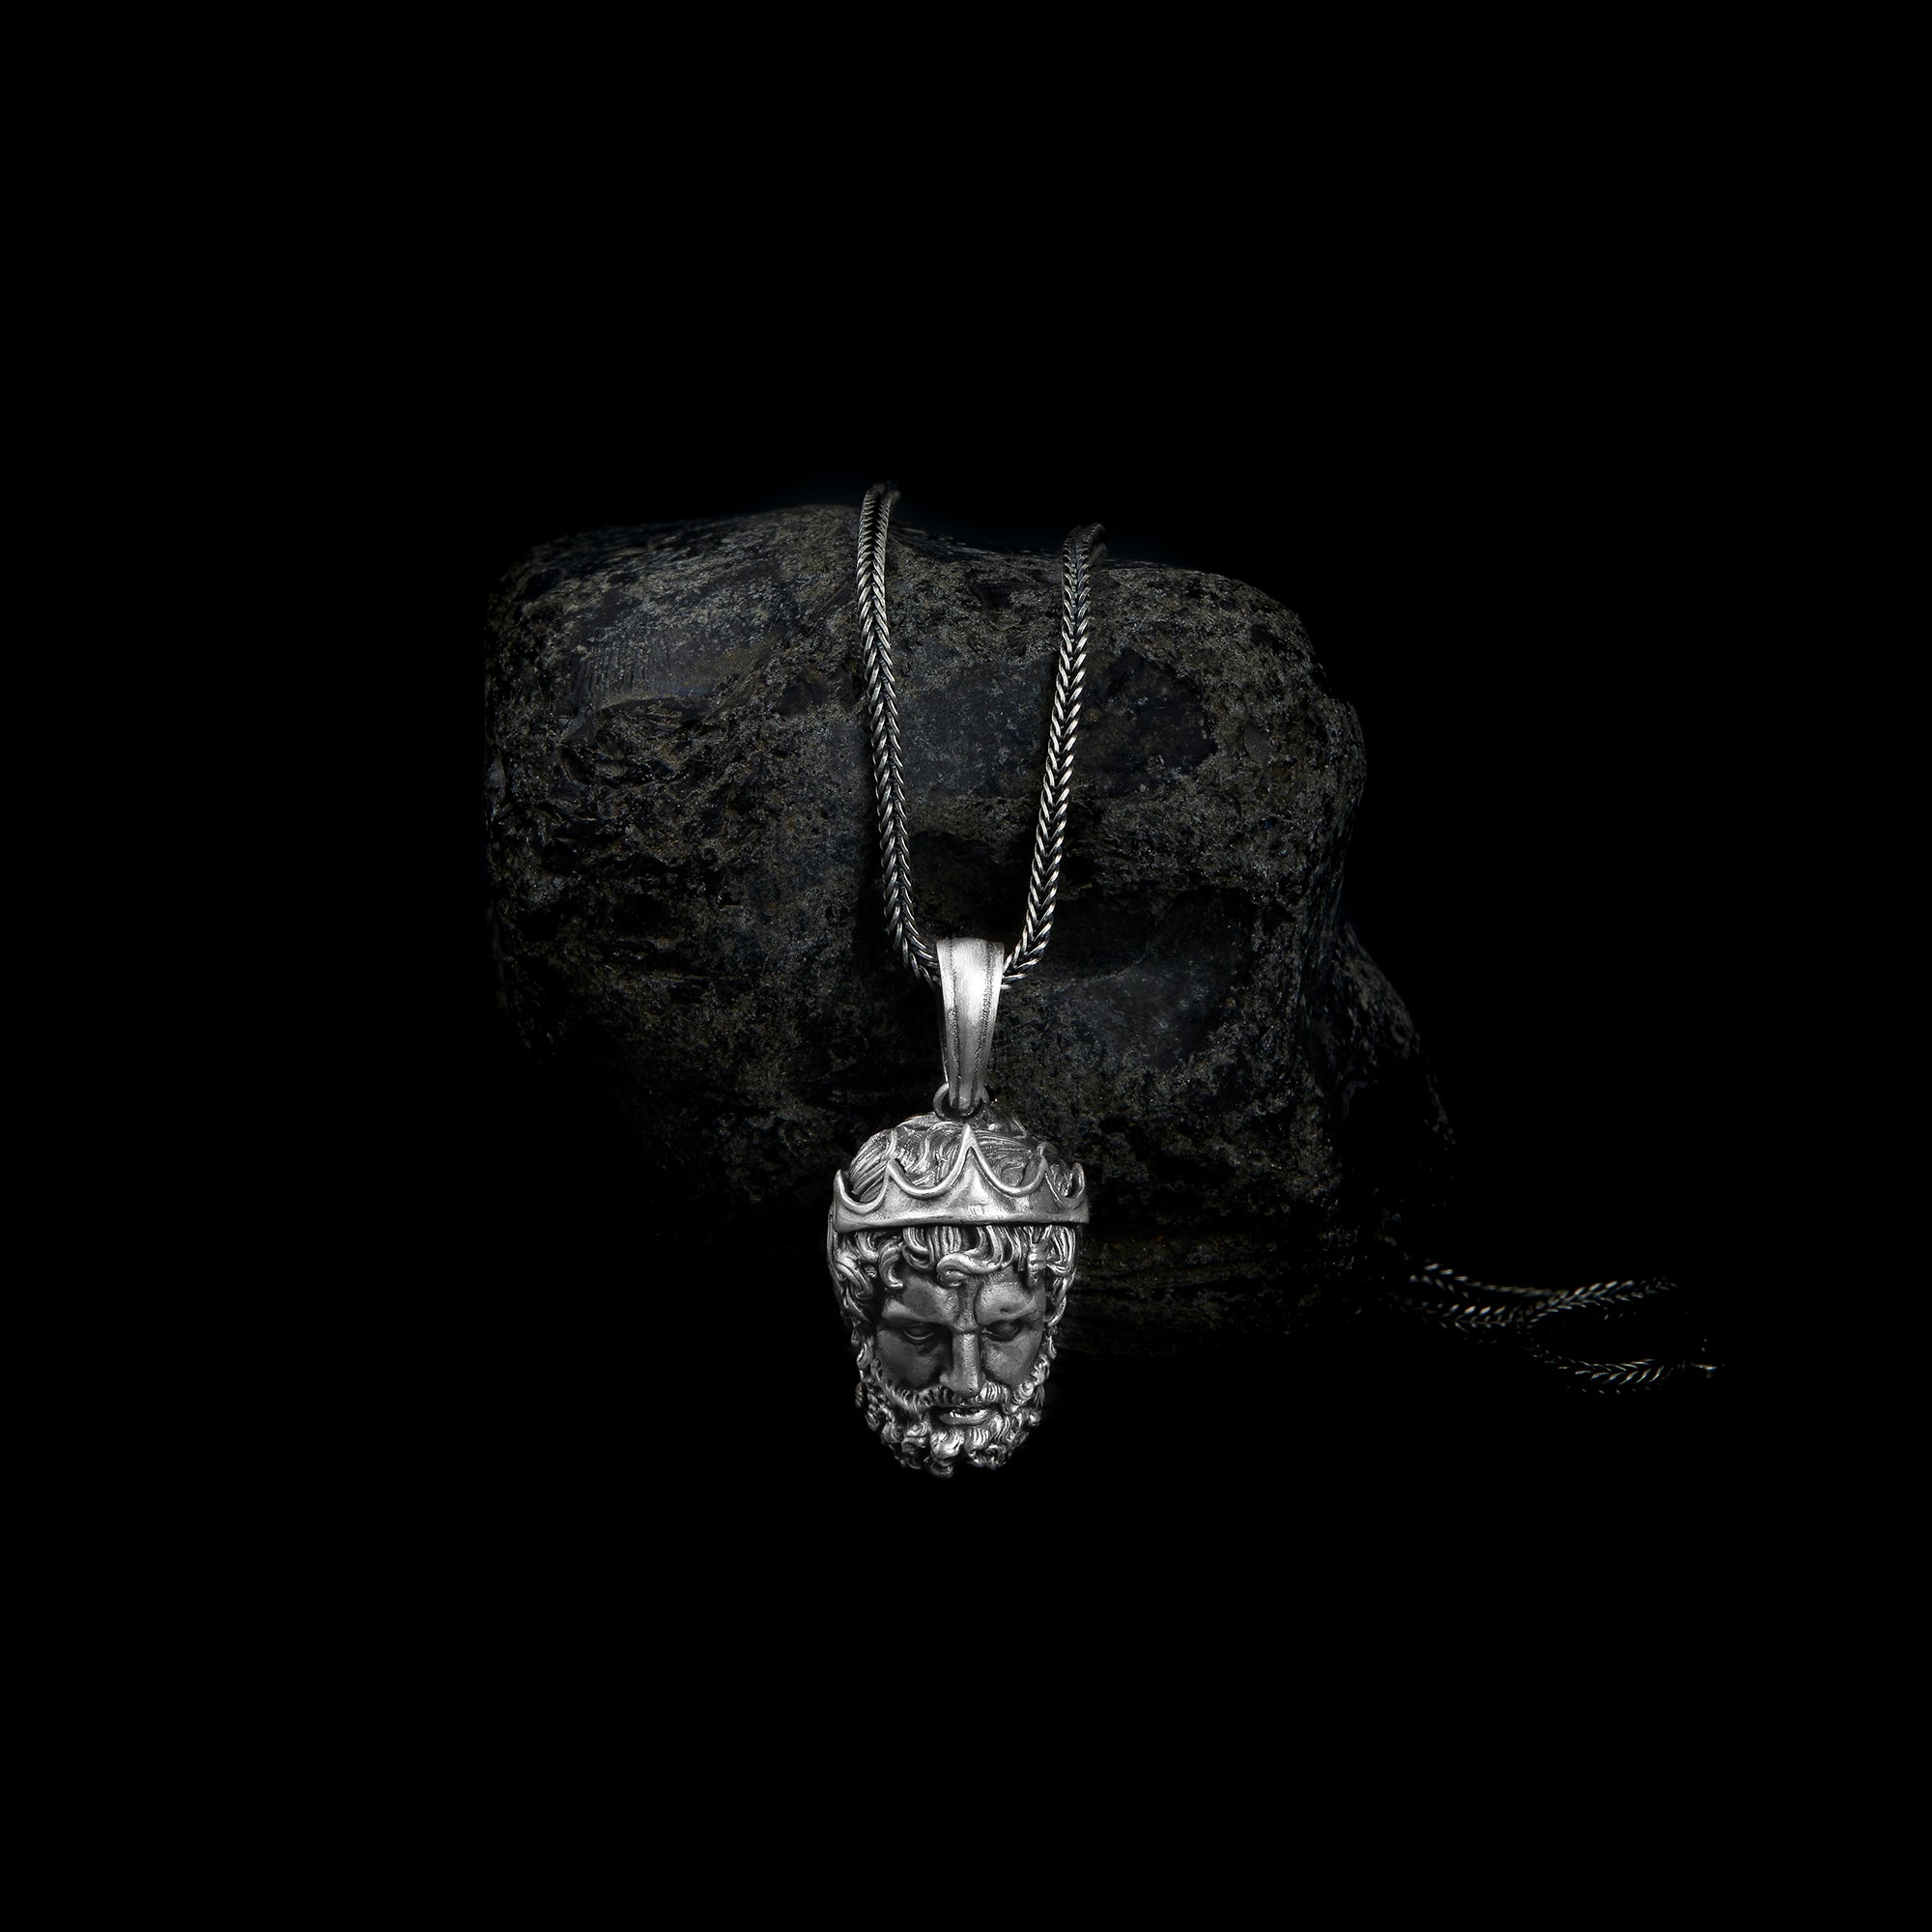 Sterling silver pendant necklace showcasing a detailed carving of Poseidon's face, adorned with a crown and accentuated by intricately designed hair and beard.